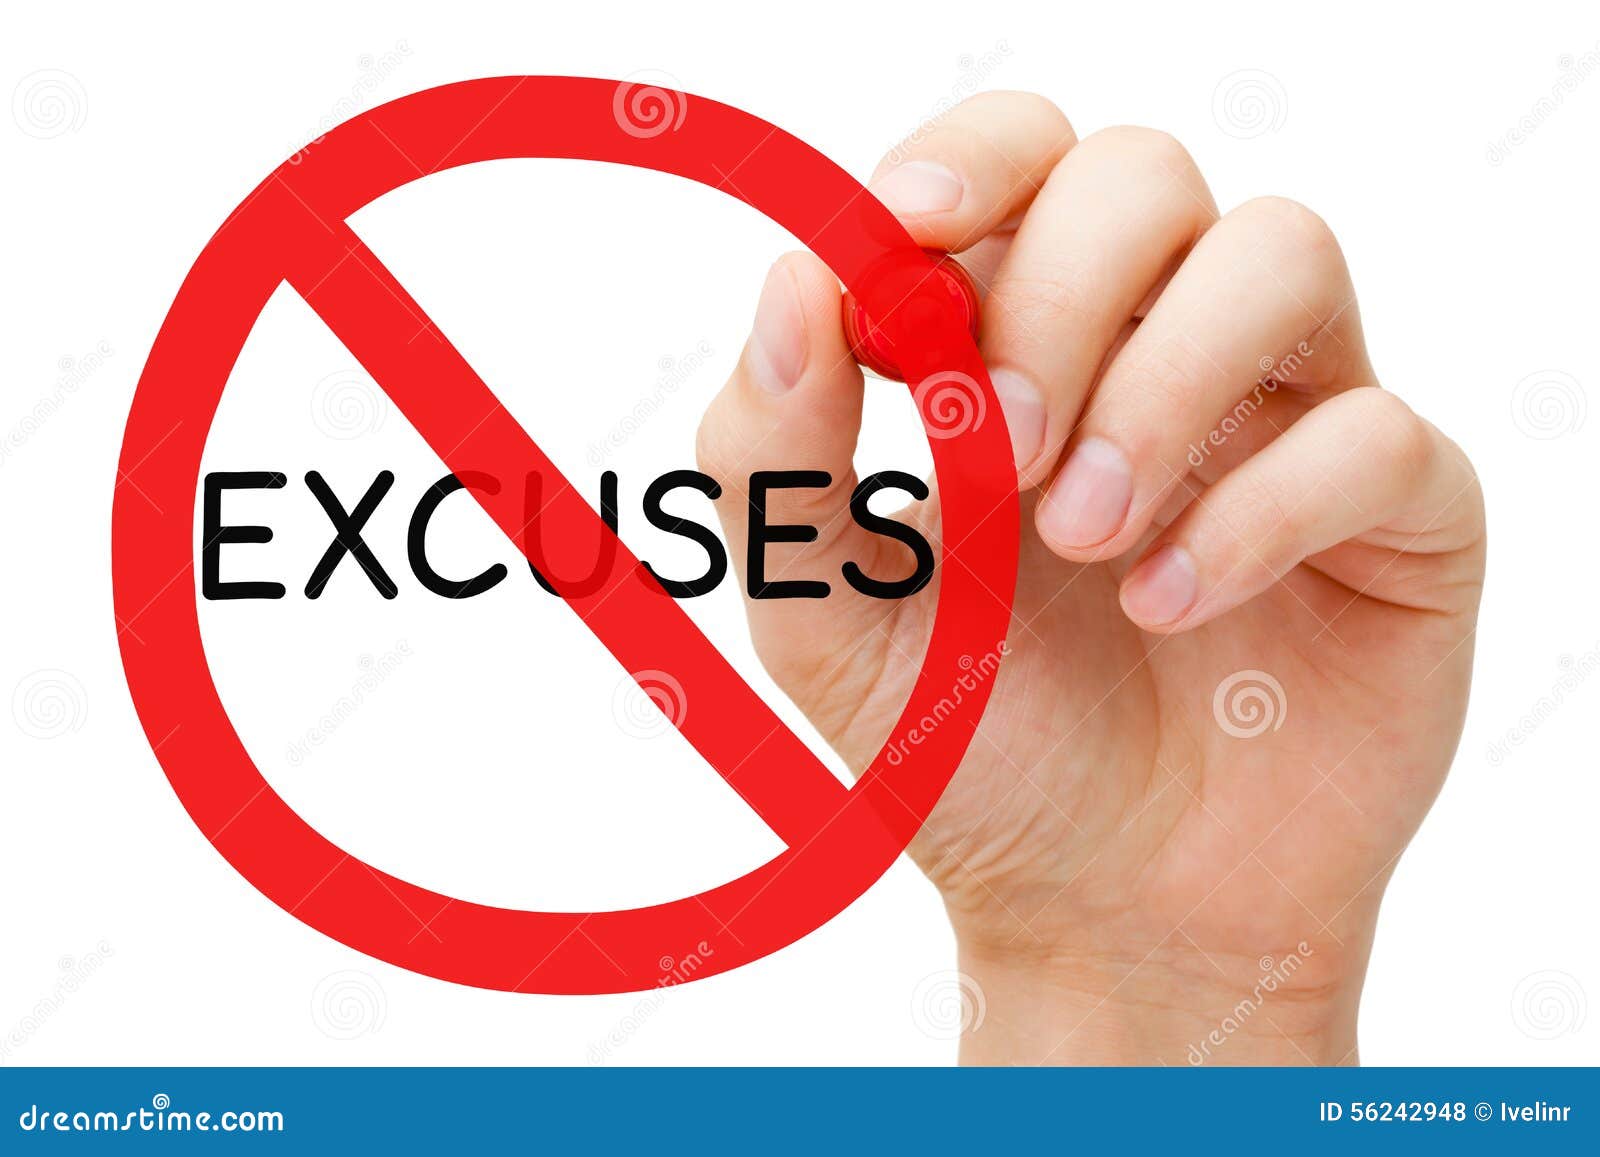 excuses prohibition sign concept